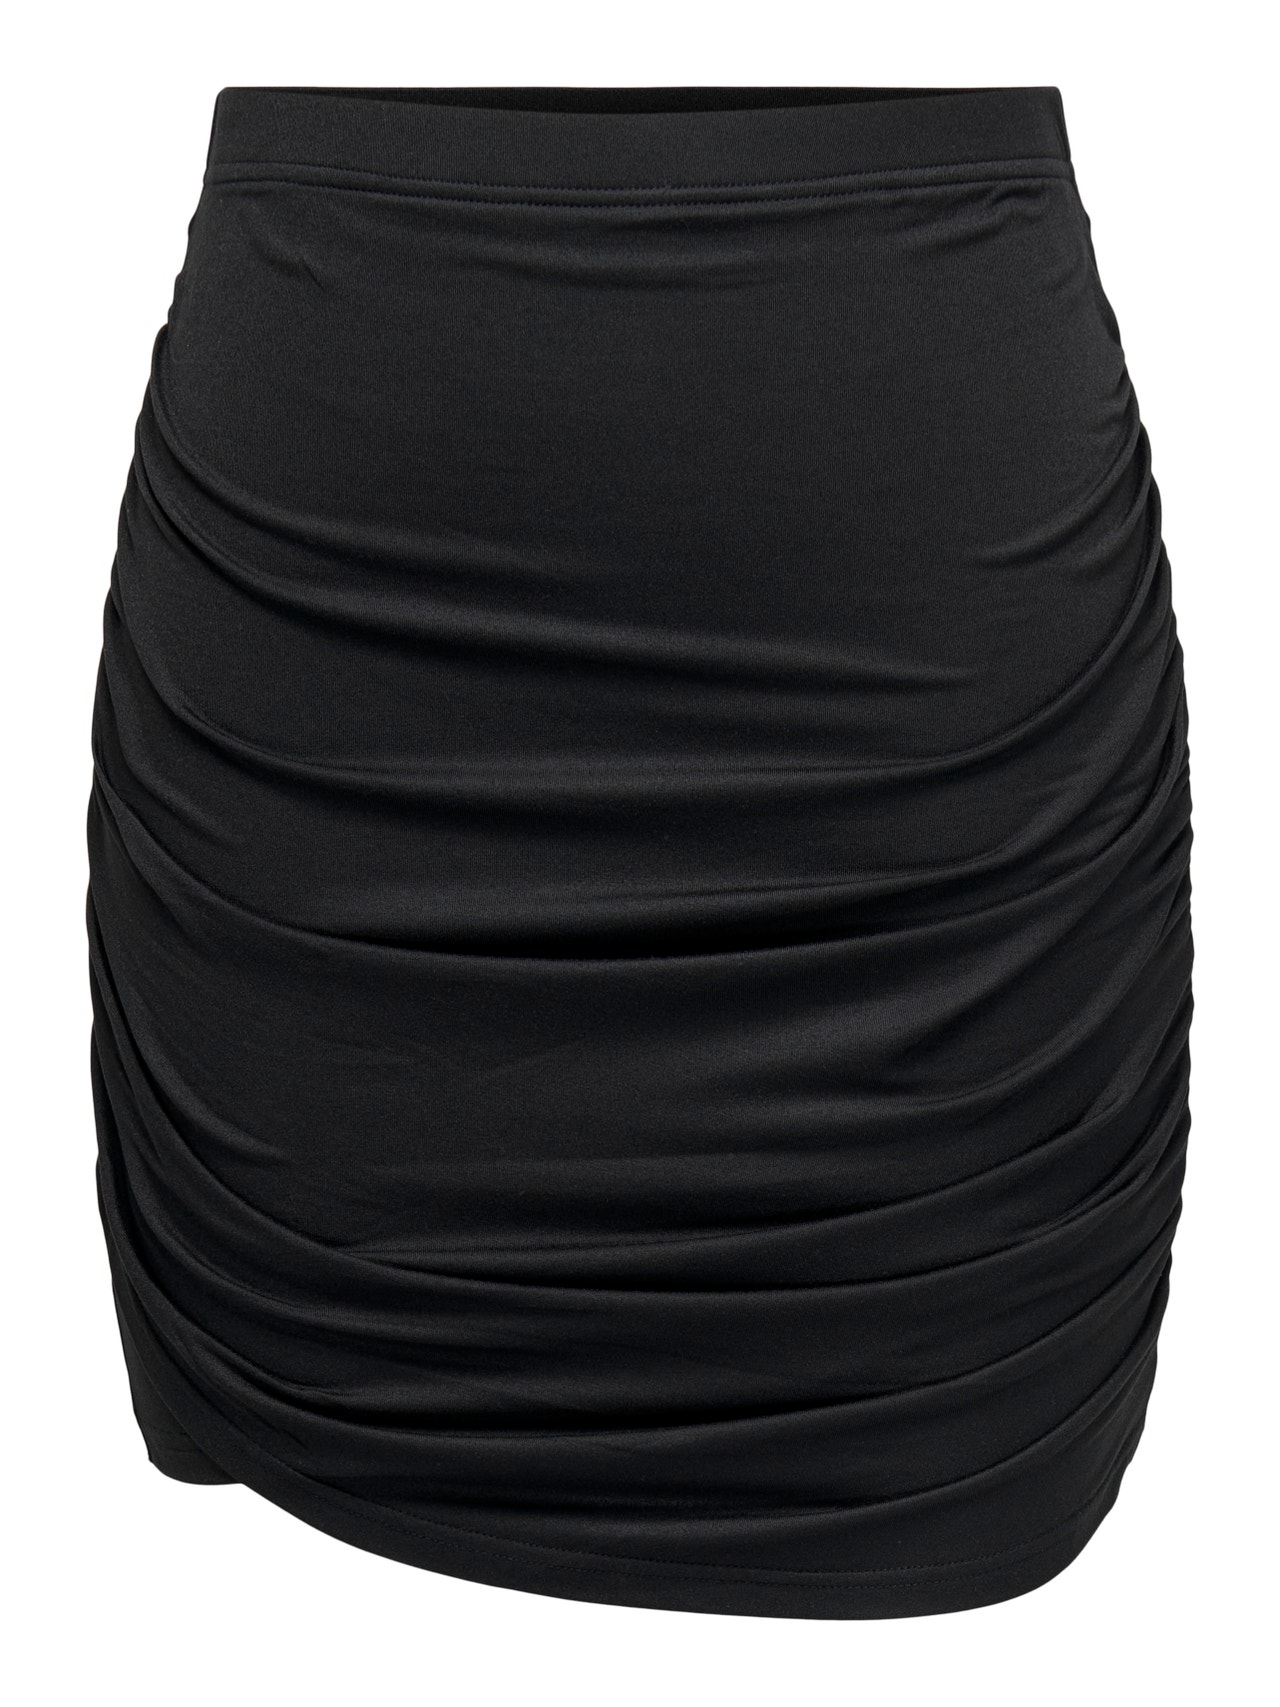 ONLY Jupe courte Taille haute -Black - 15291401